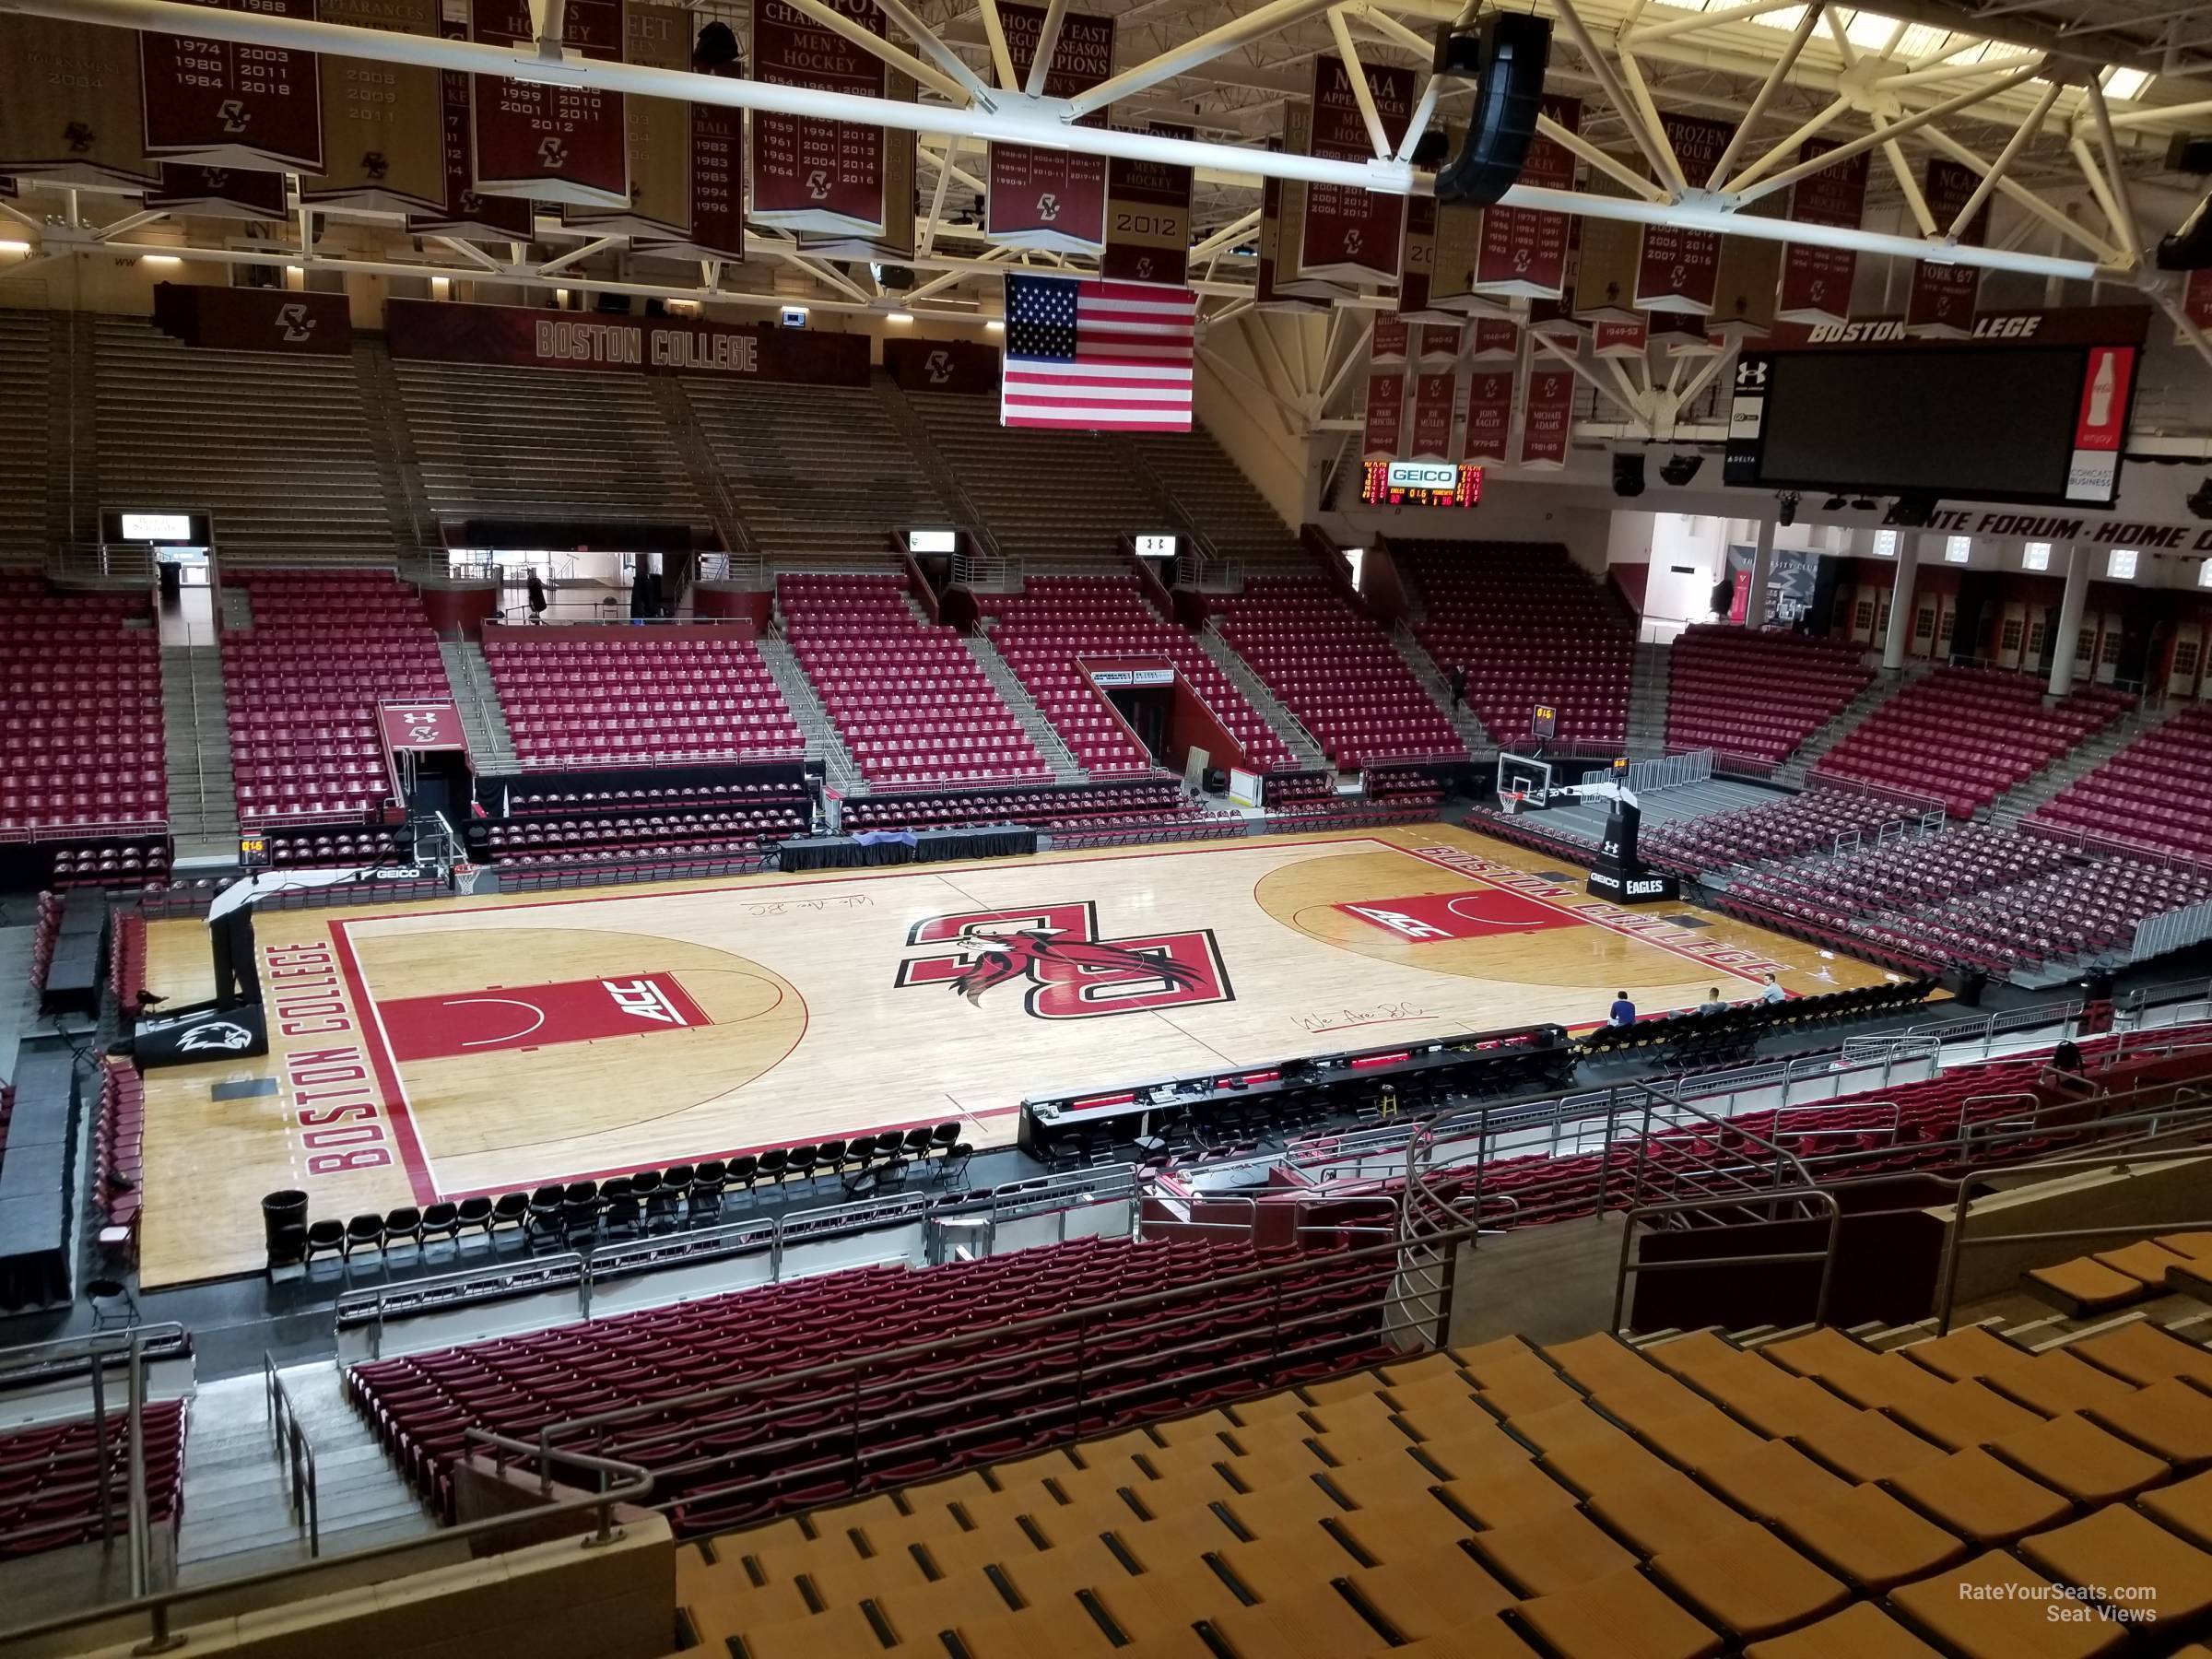 section nn, row 12 seat view  - conte forum